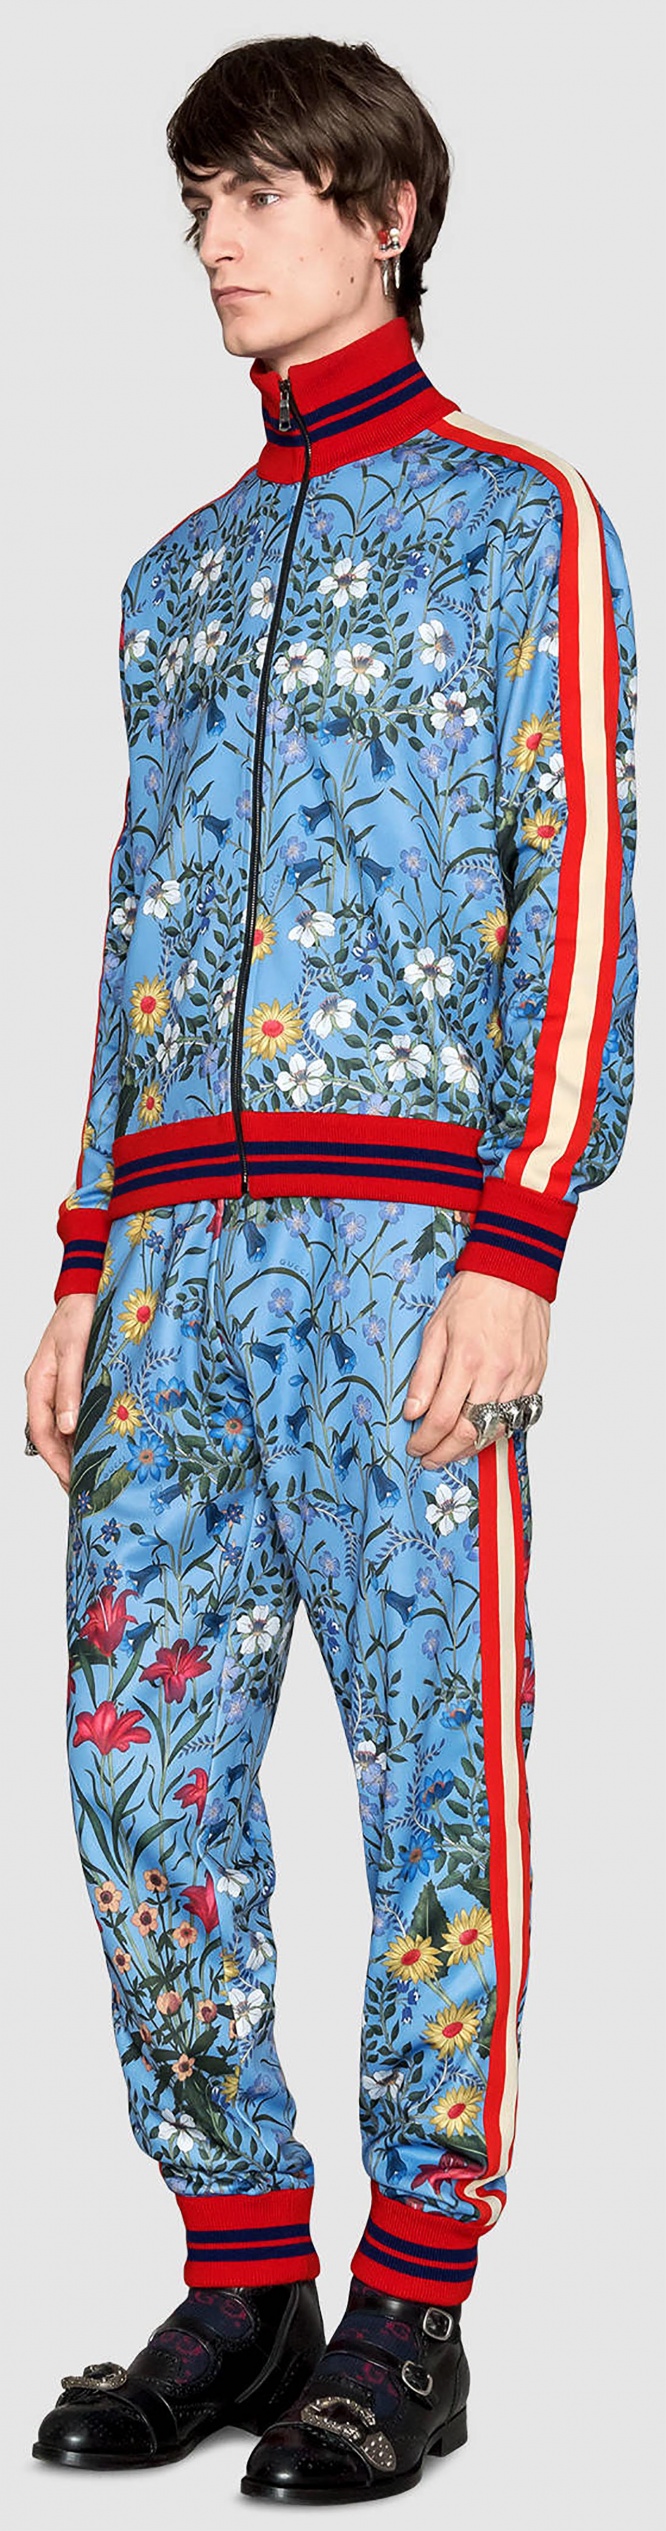 new-flora-technical-jersey-jacket-gucci2